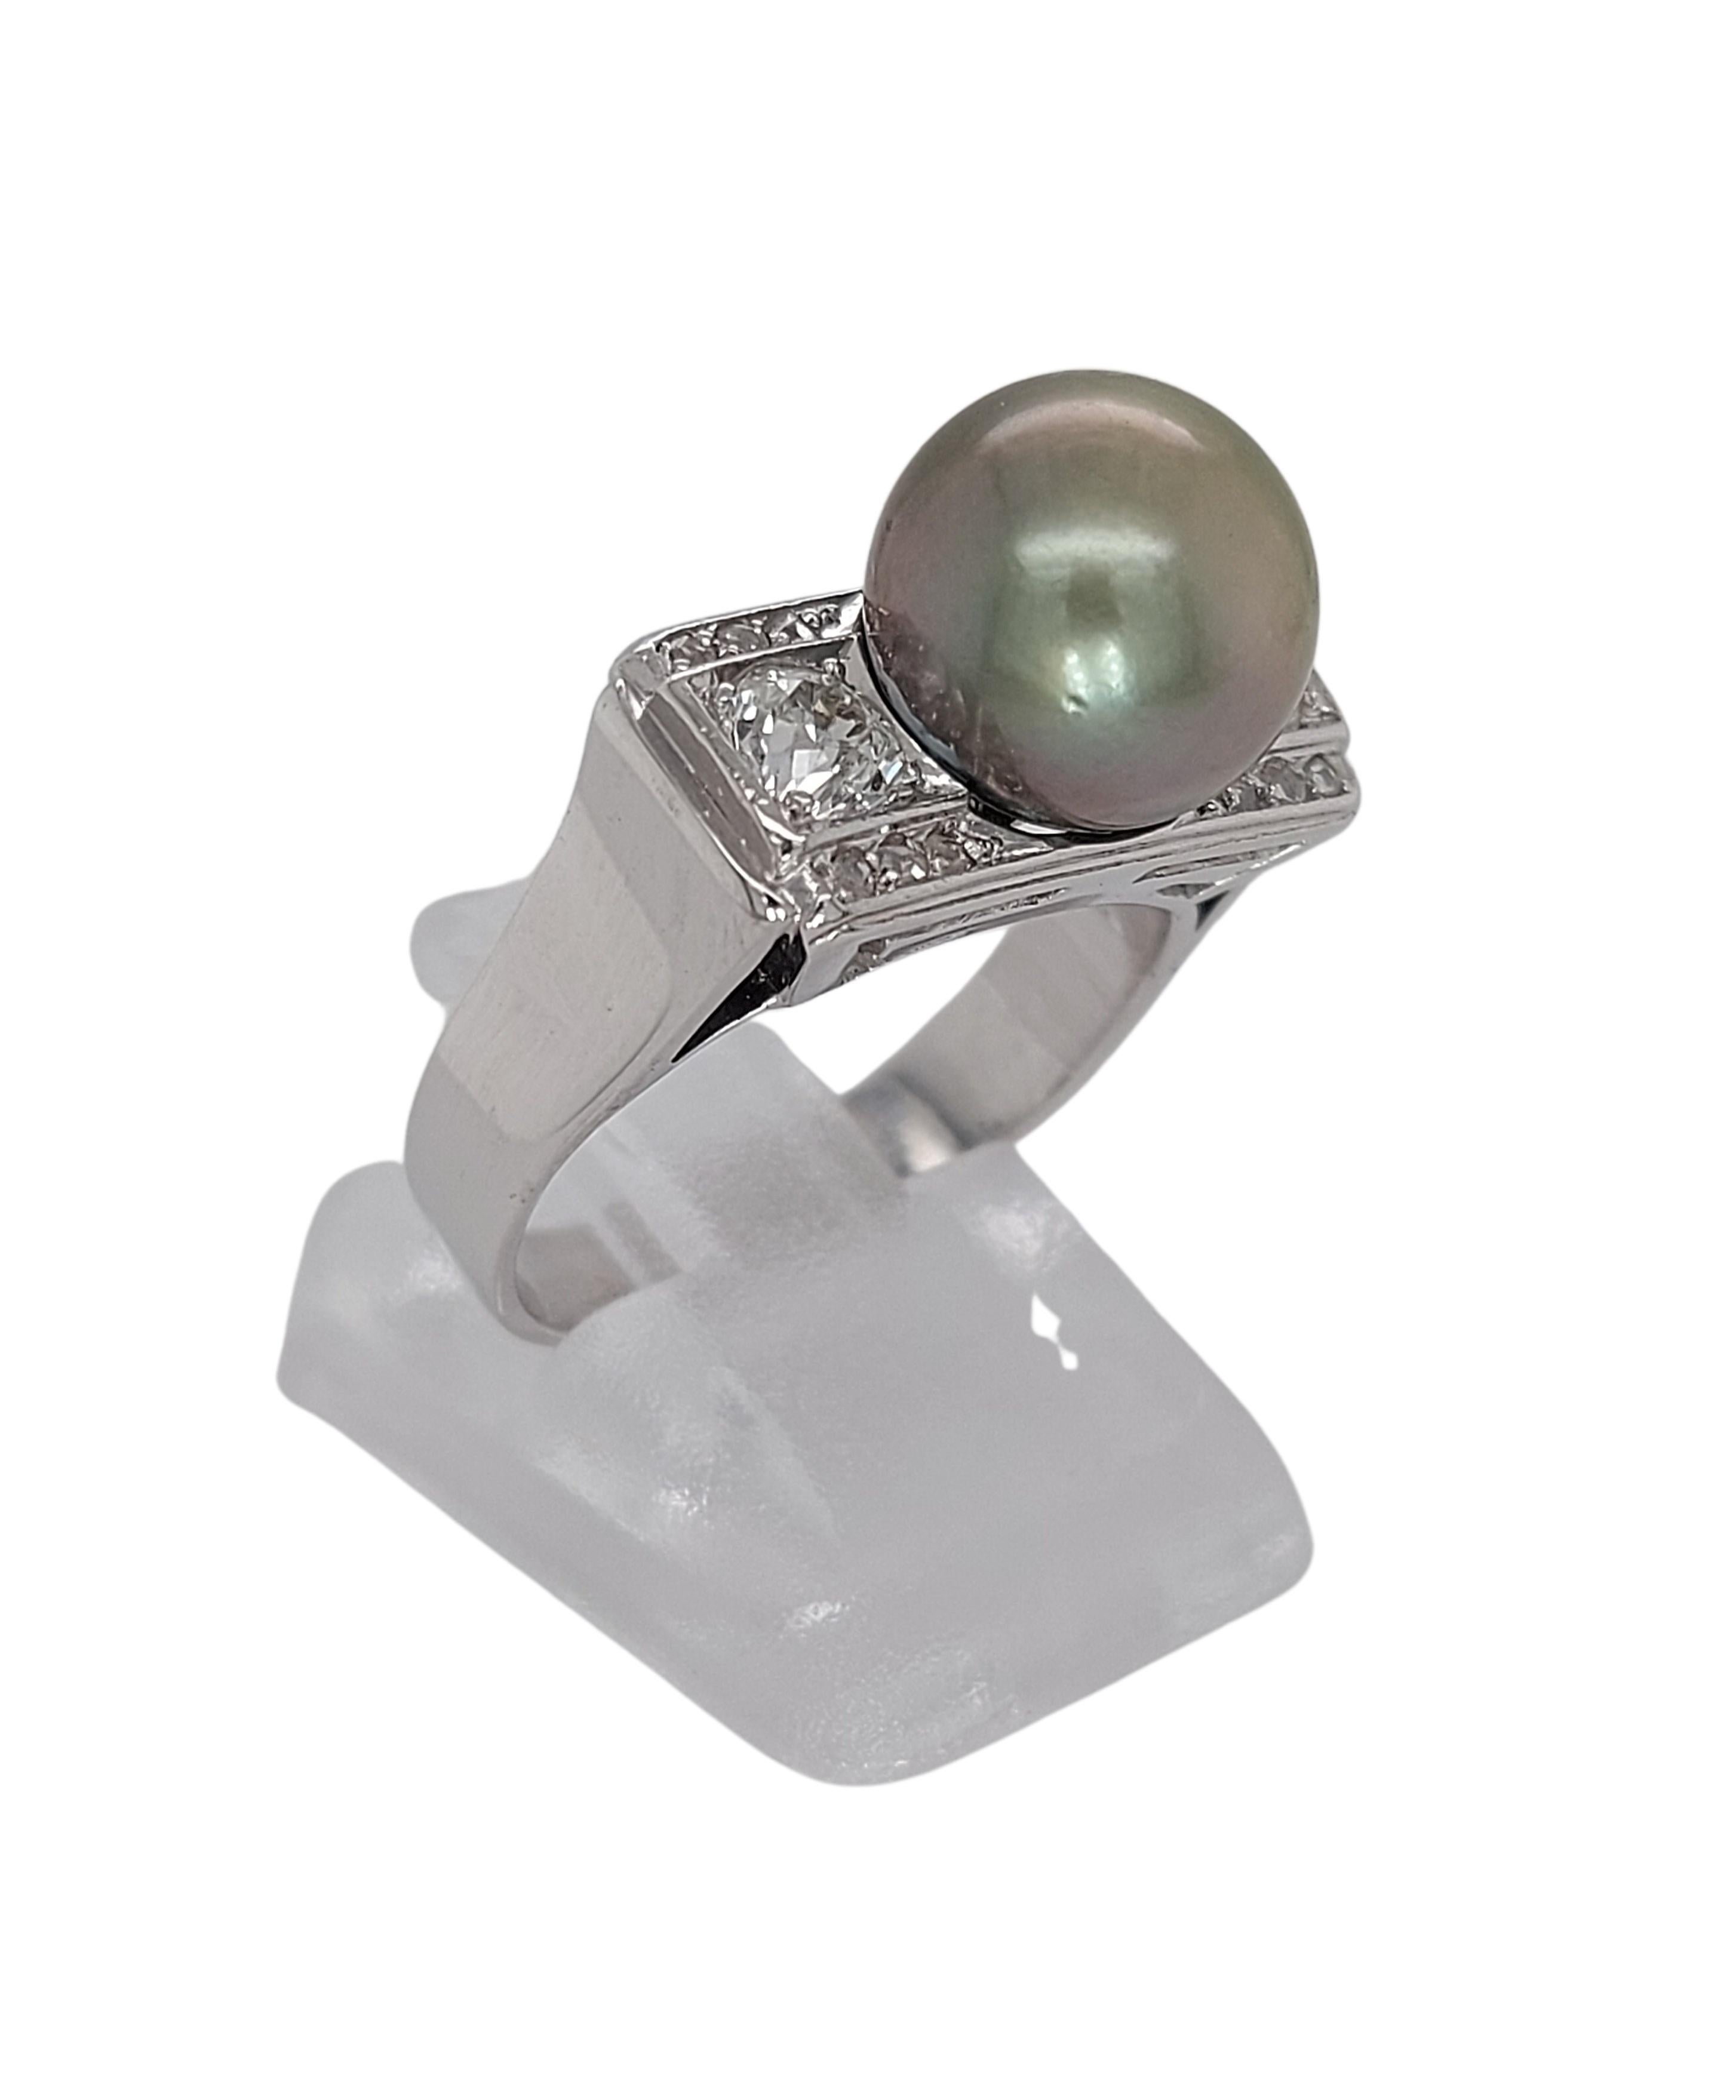 Women's or Men's 18kt White Gold Ring with Green Tahiti Pearl and 0.5ct Old Mine Cut Diamonds